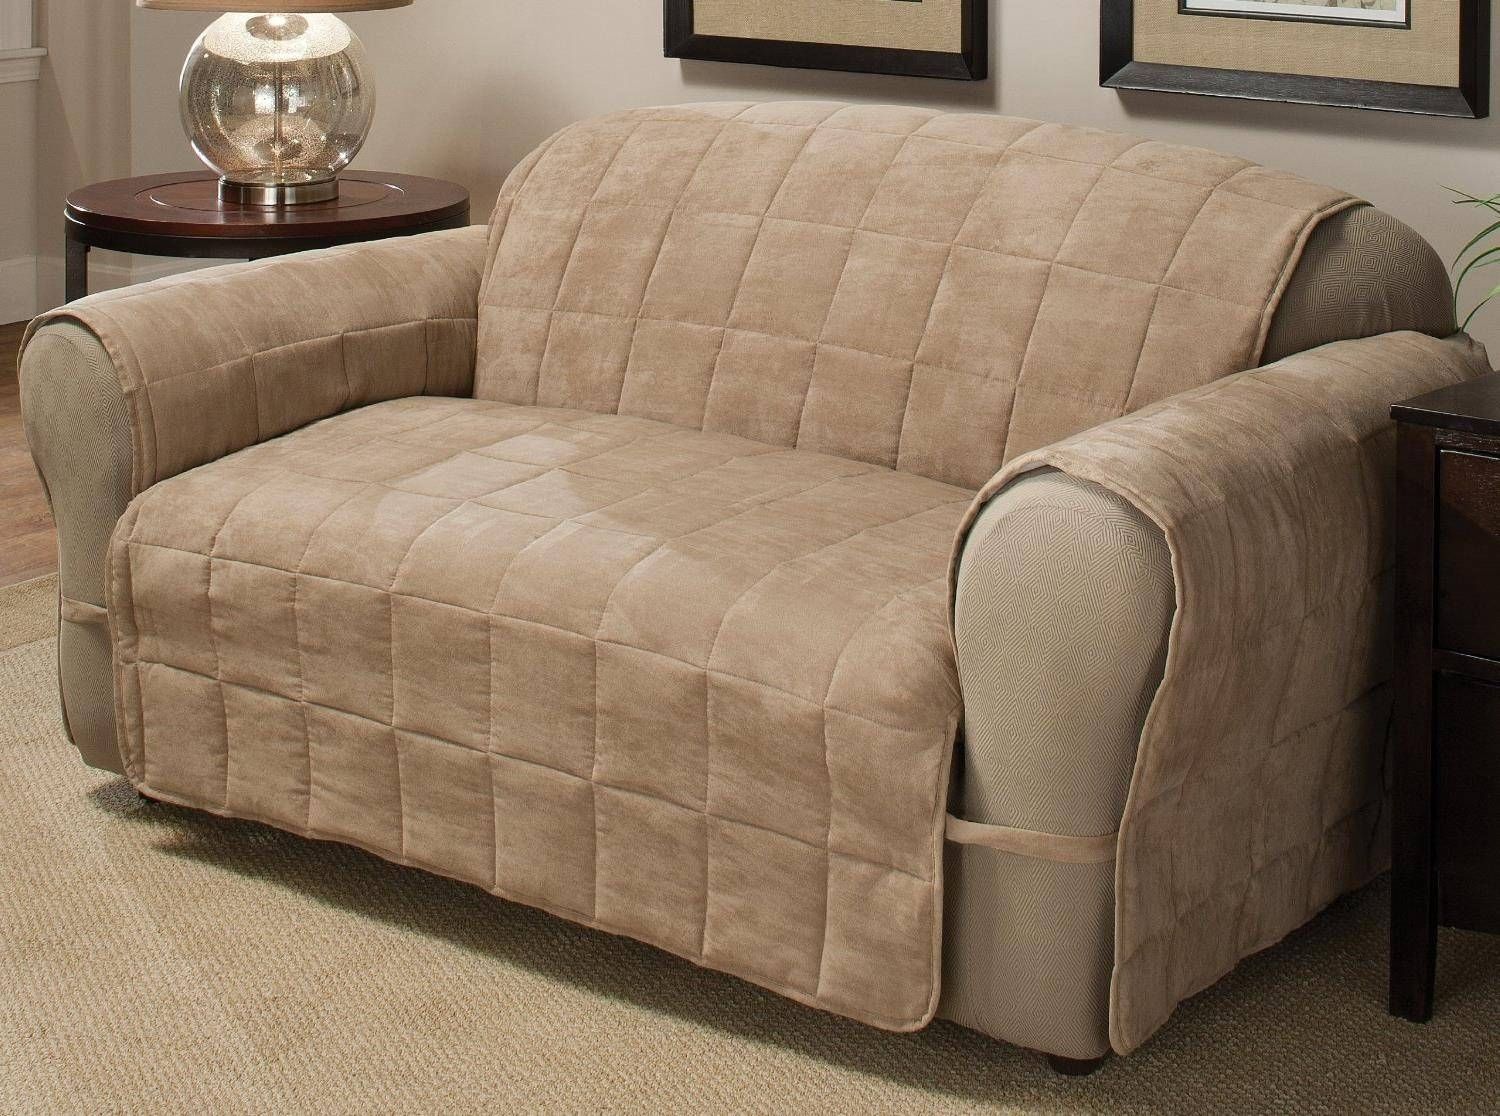 1 piece couch cover leather sofa